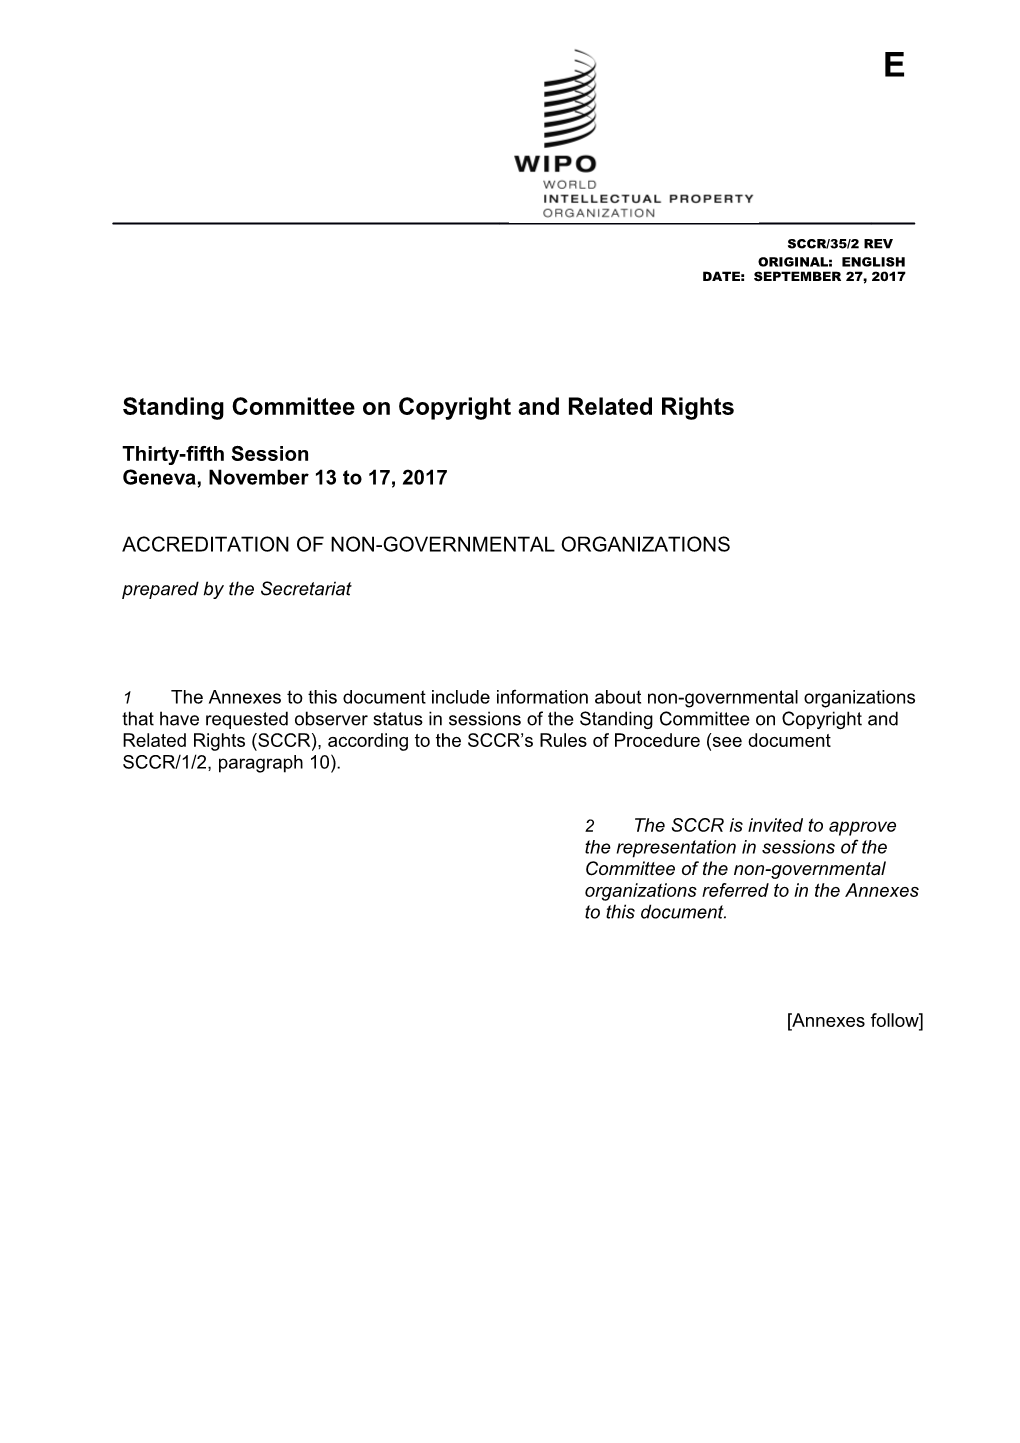 Standing Committee on Copyright and Related Rights s7